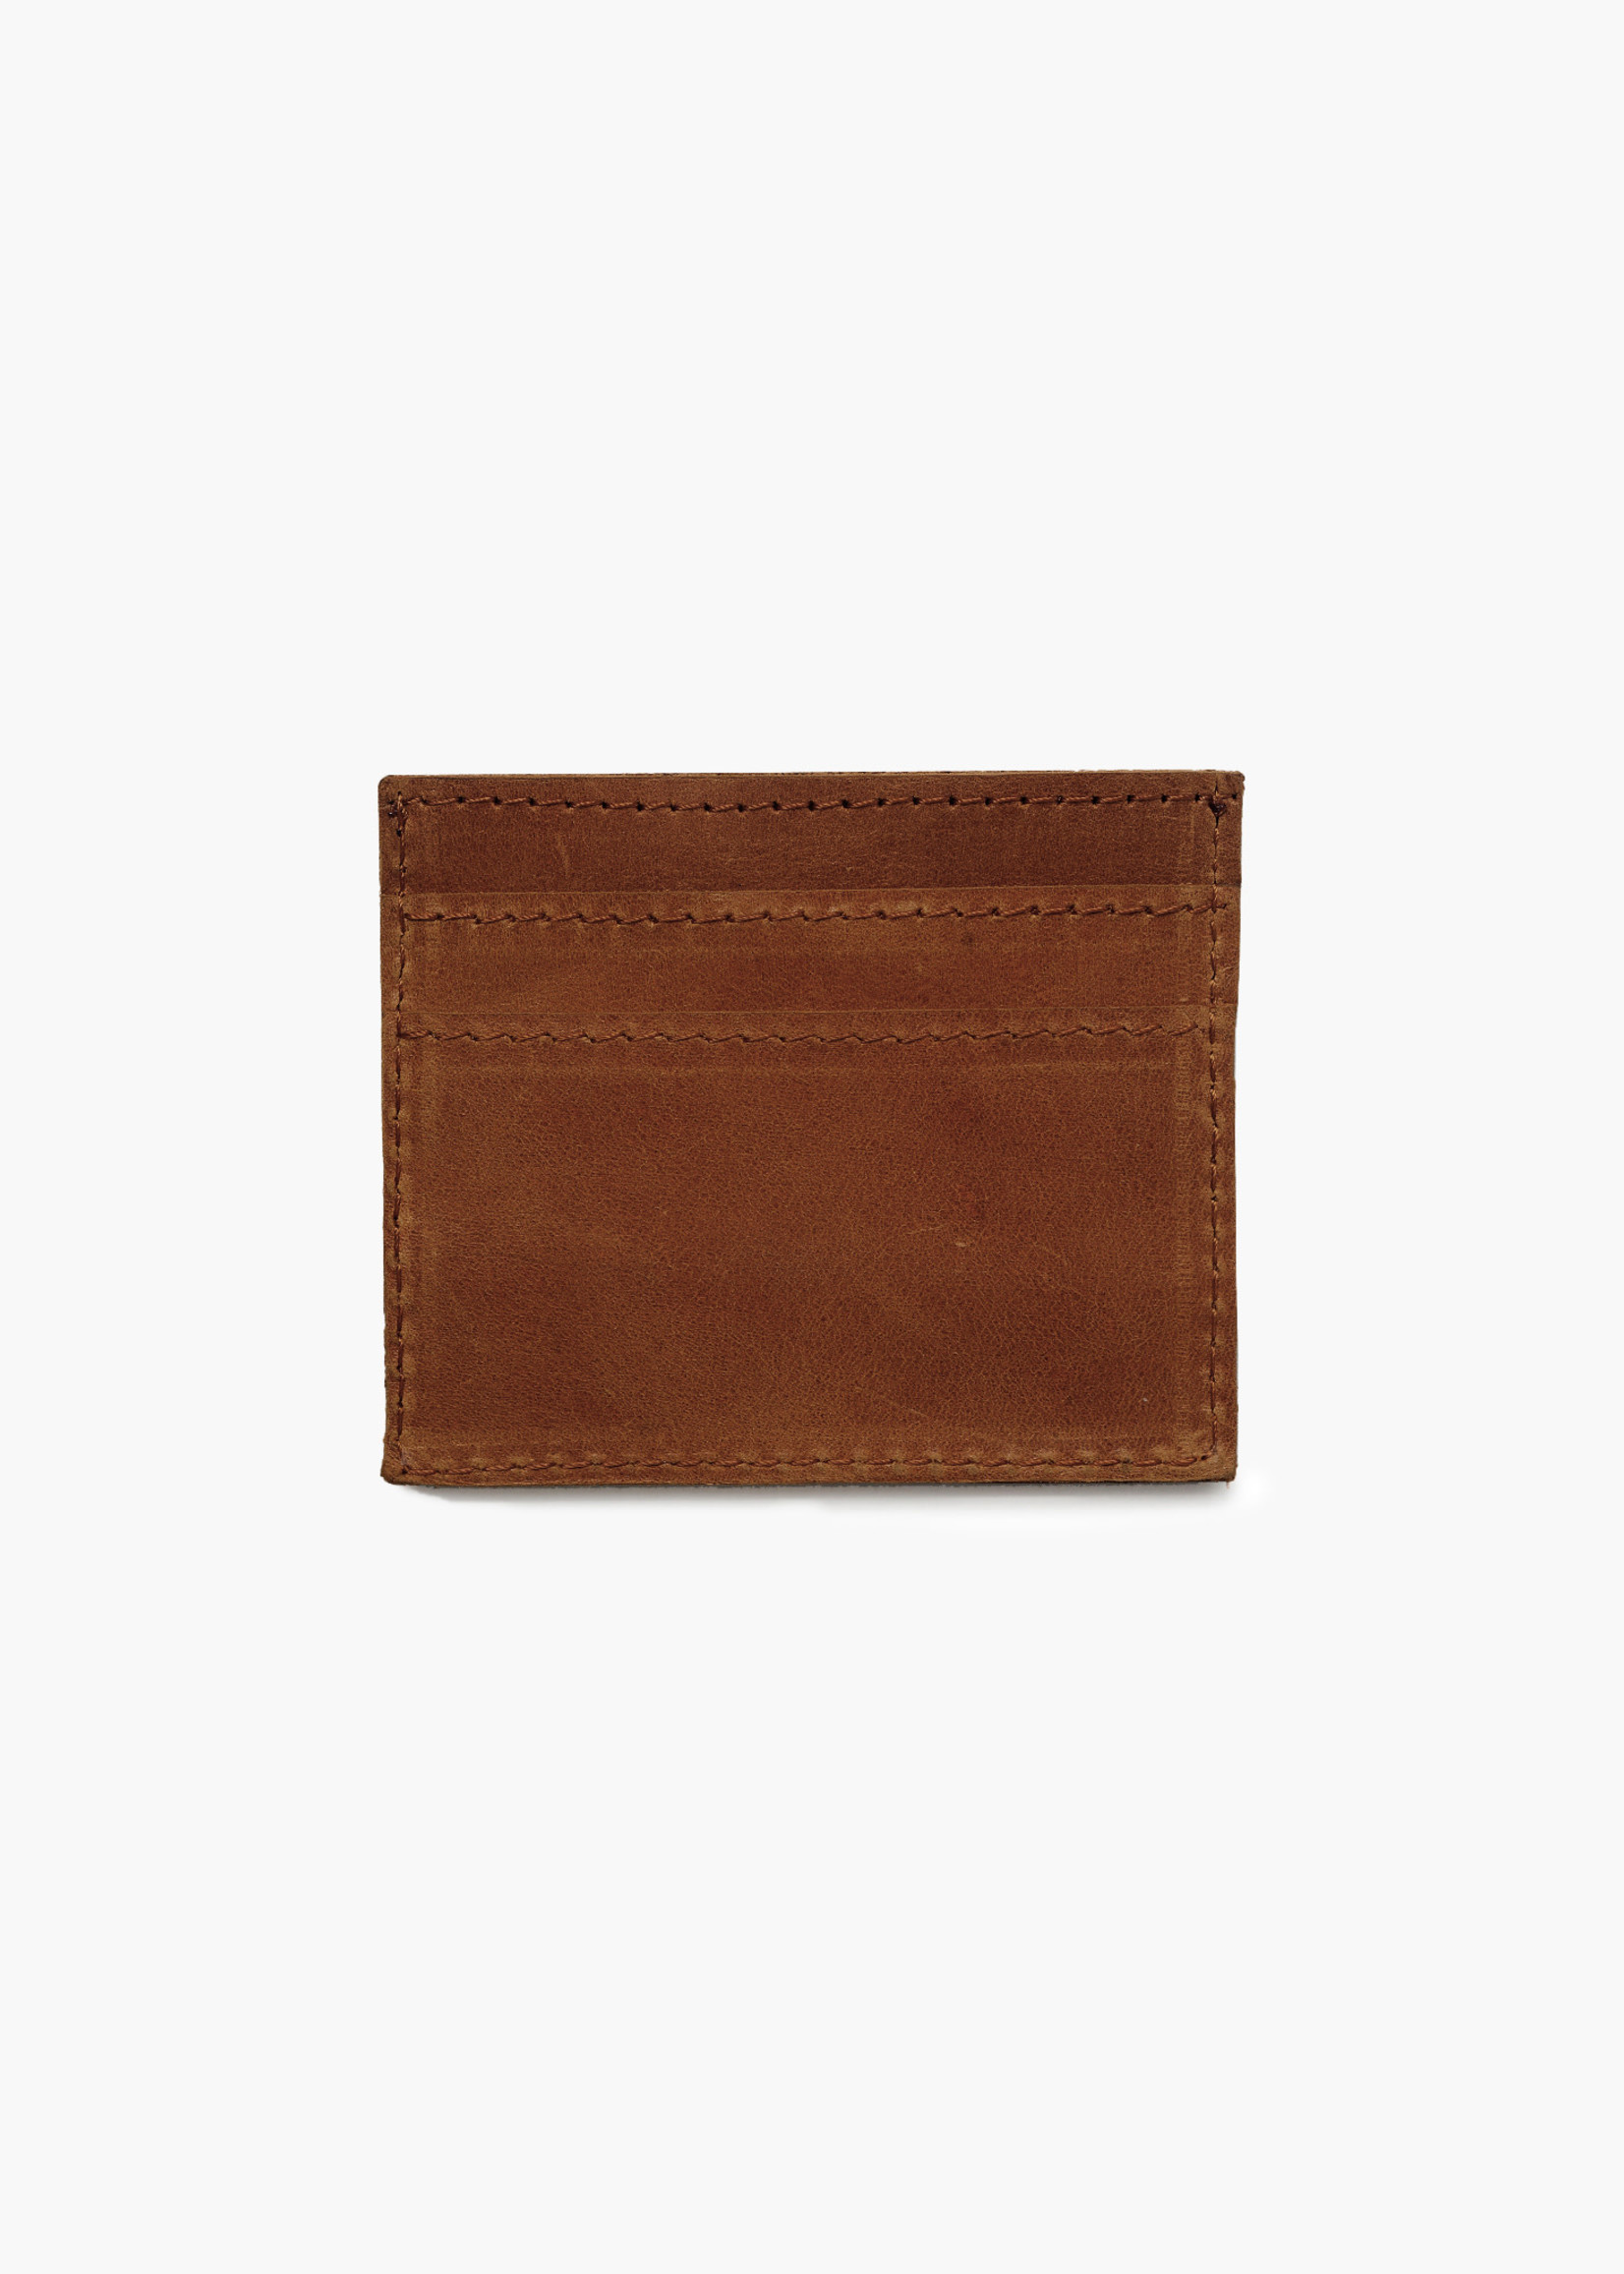 ABLE Alem Wallet - Whiskey